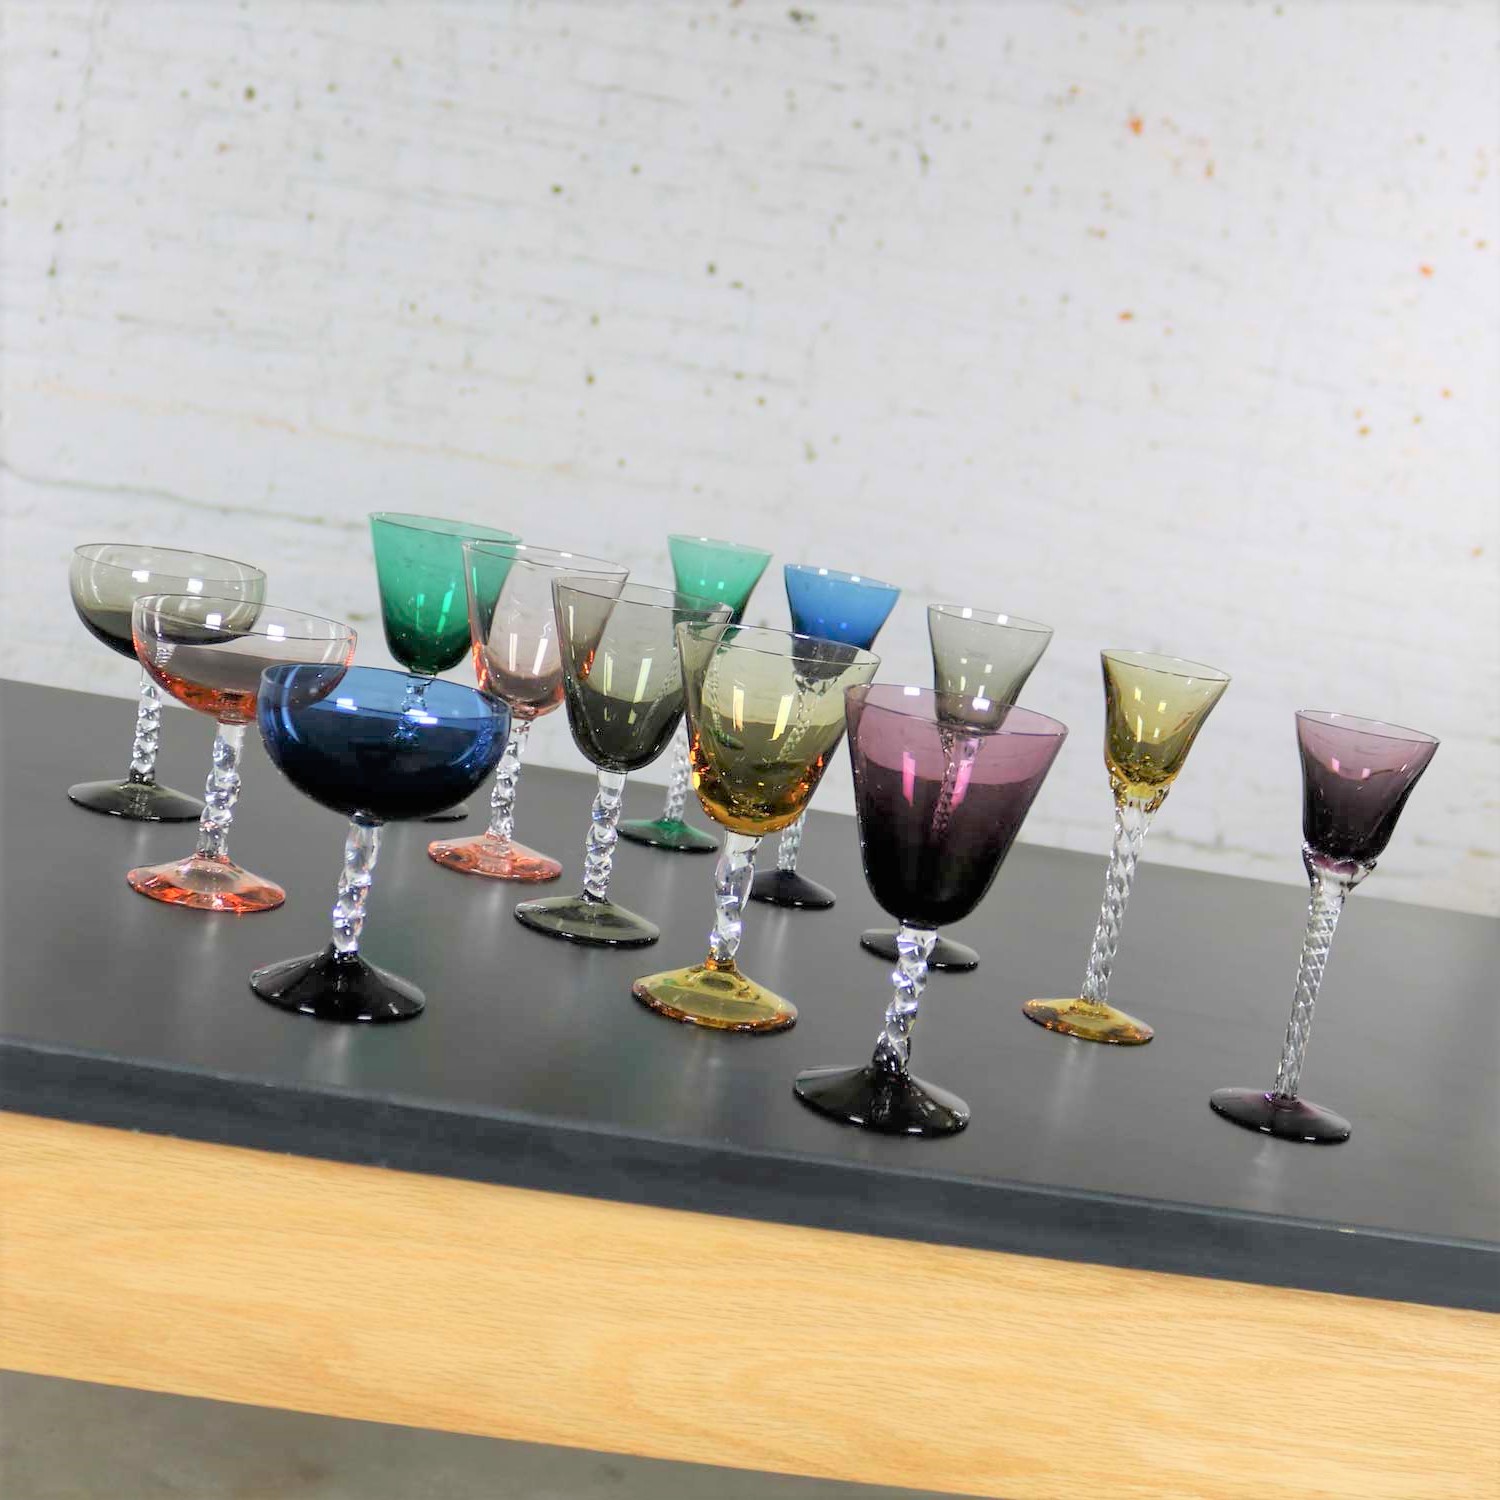 Set of 13 Pieces Multi Color Stemware in Three Sizes with Twisted Clear Stems